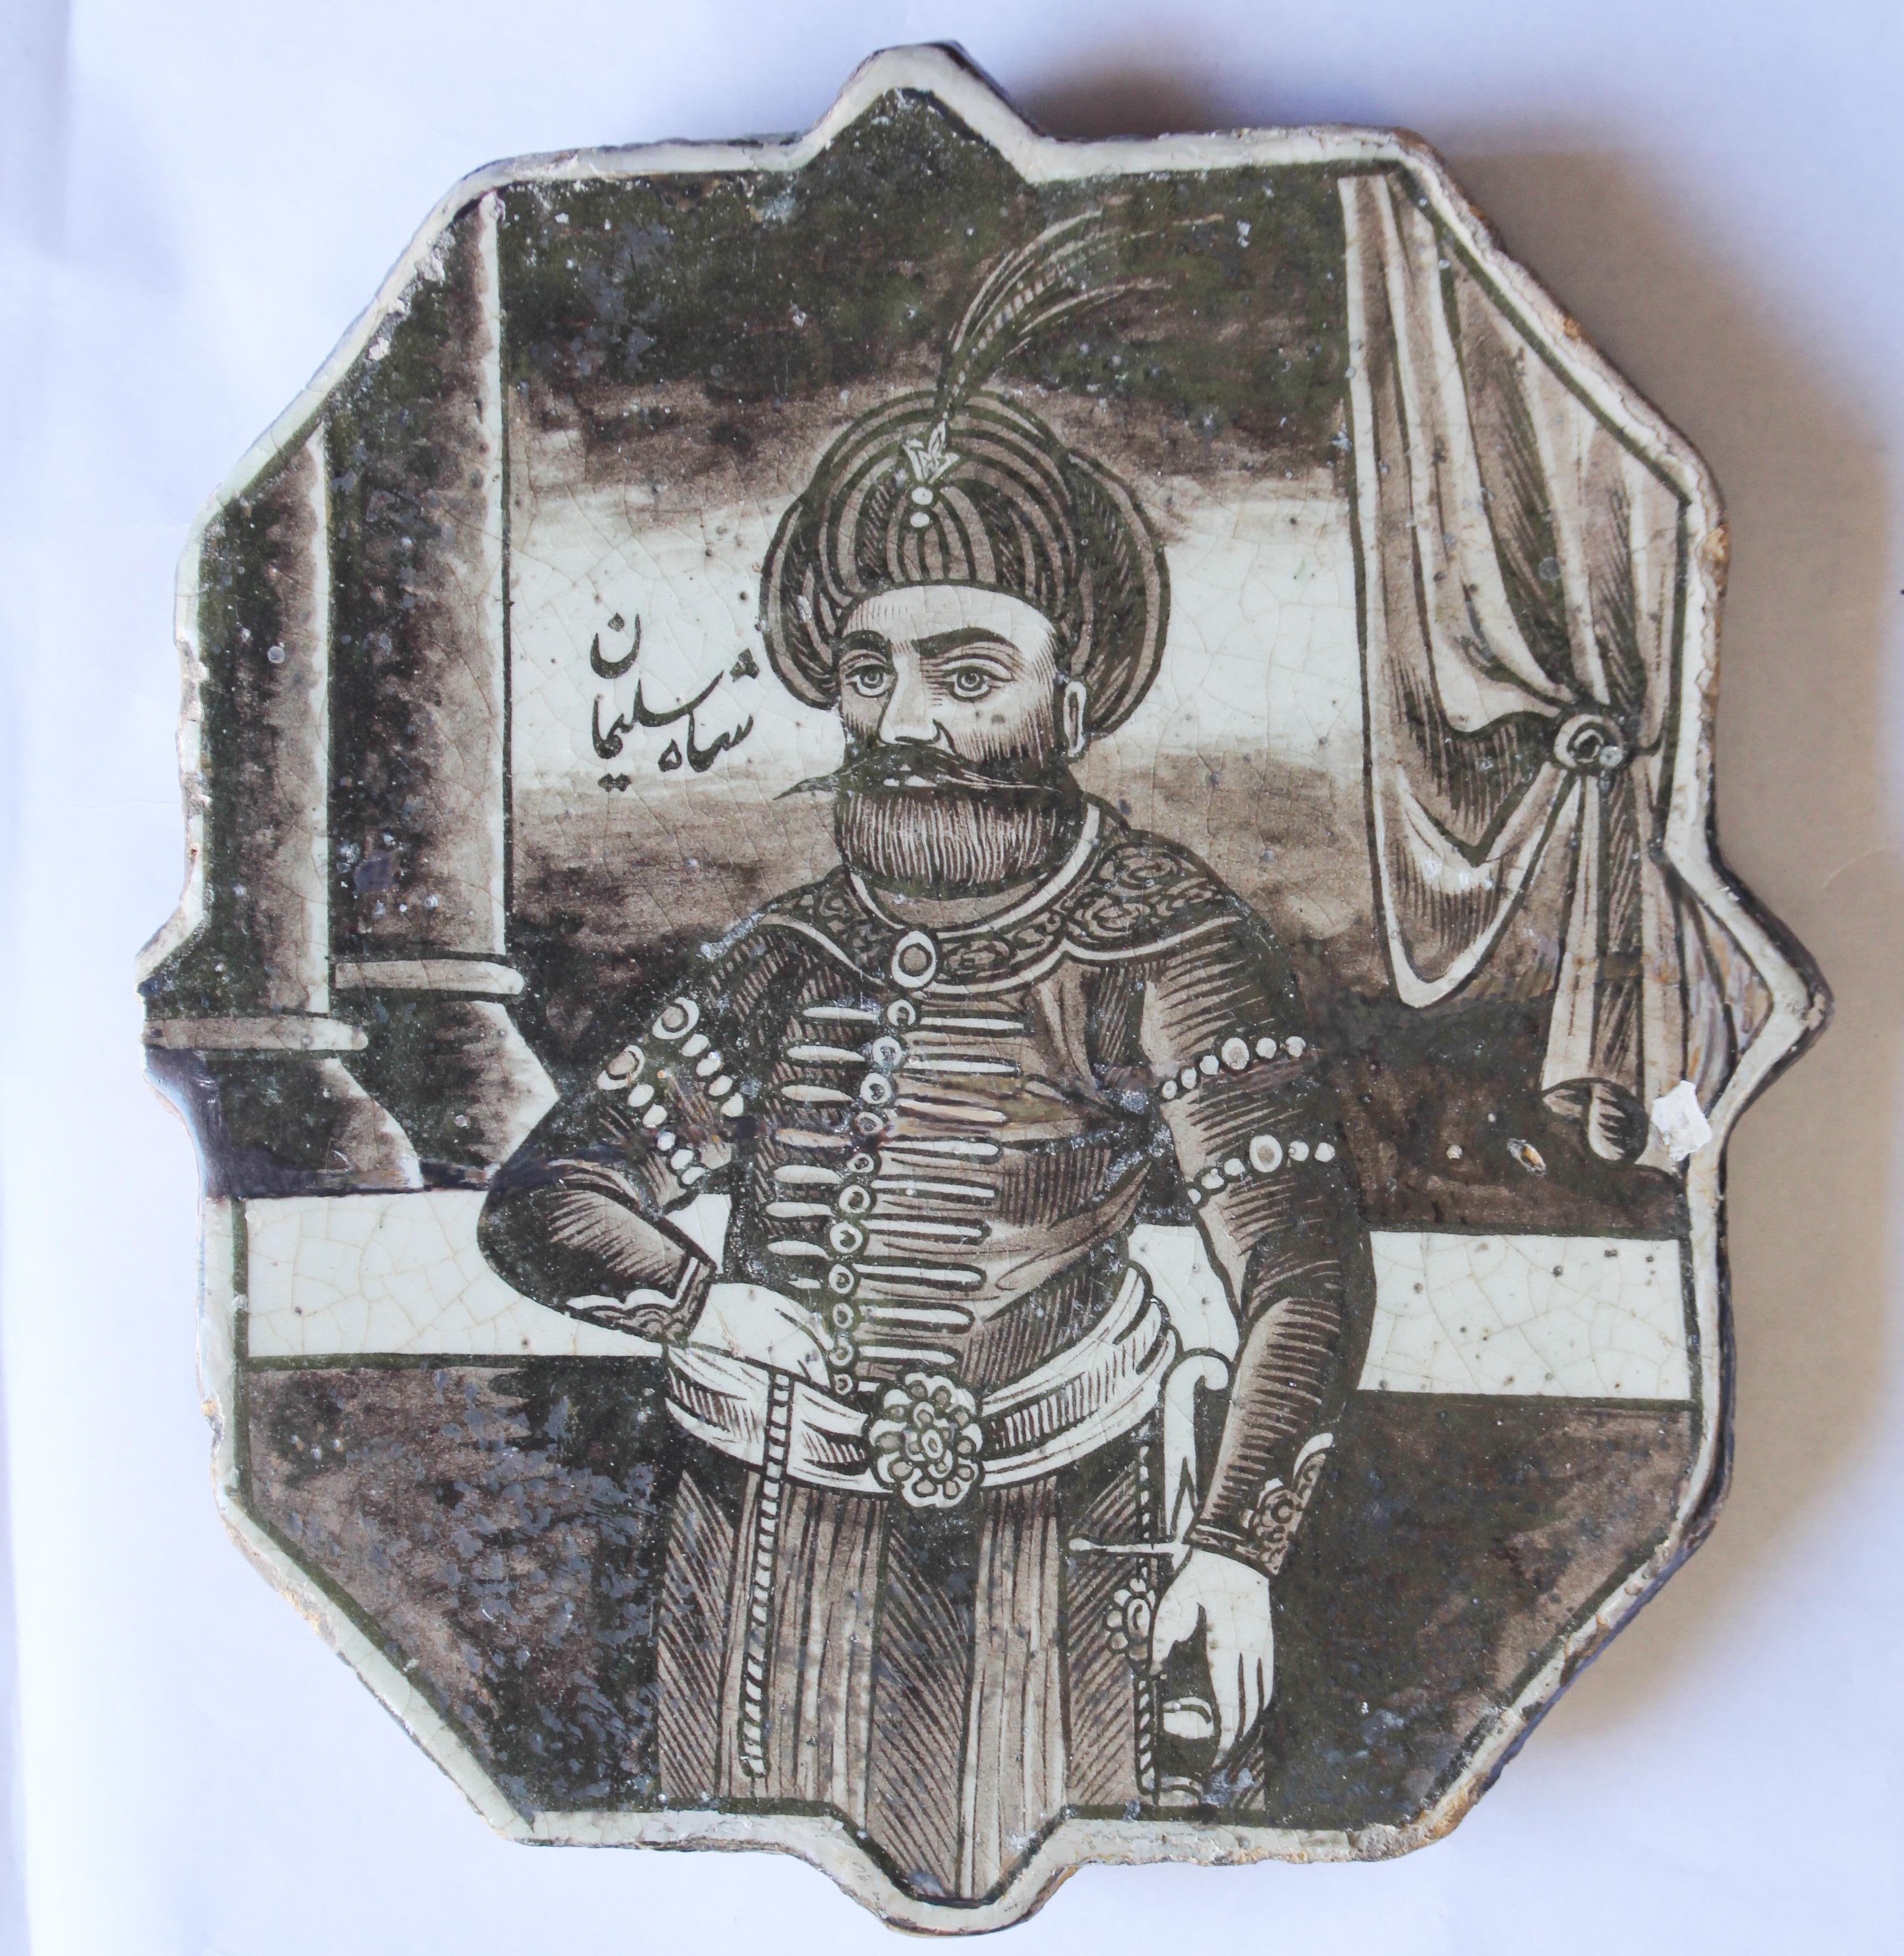 Antique 19th century hand painted Islamic Turkish ottoman ceramic tile.
Painting figure of a Shah Suleiman in a palace before a colonnade and curtain.
Arabic script on left top corner, 